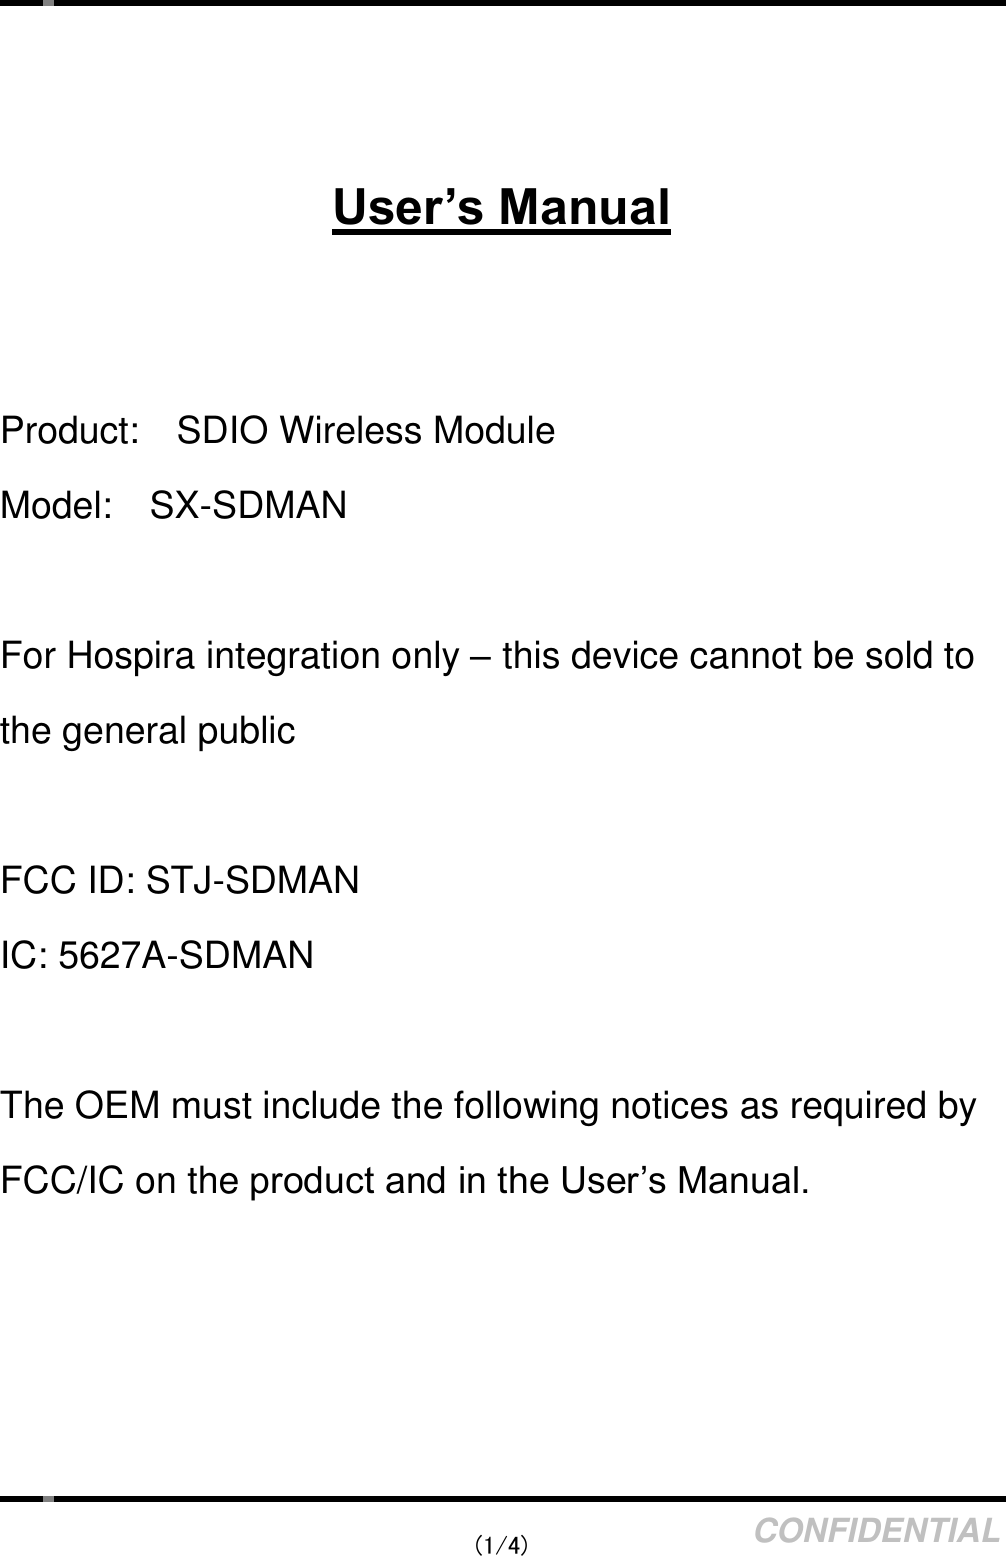    (1/4) CONFIDENTIAL    User’s Manual   Product:    SDIO Wireless Module Model:    SX-SDMAN  For Hospira integration only – this device cannot be sold to the general public  FCC ID: STJ-SDMAN IC: 5627A-SDMAN  The OEM must include the following notices as required by FCC/IC on the product and in the User’s Manual.